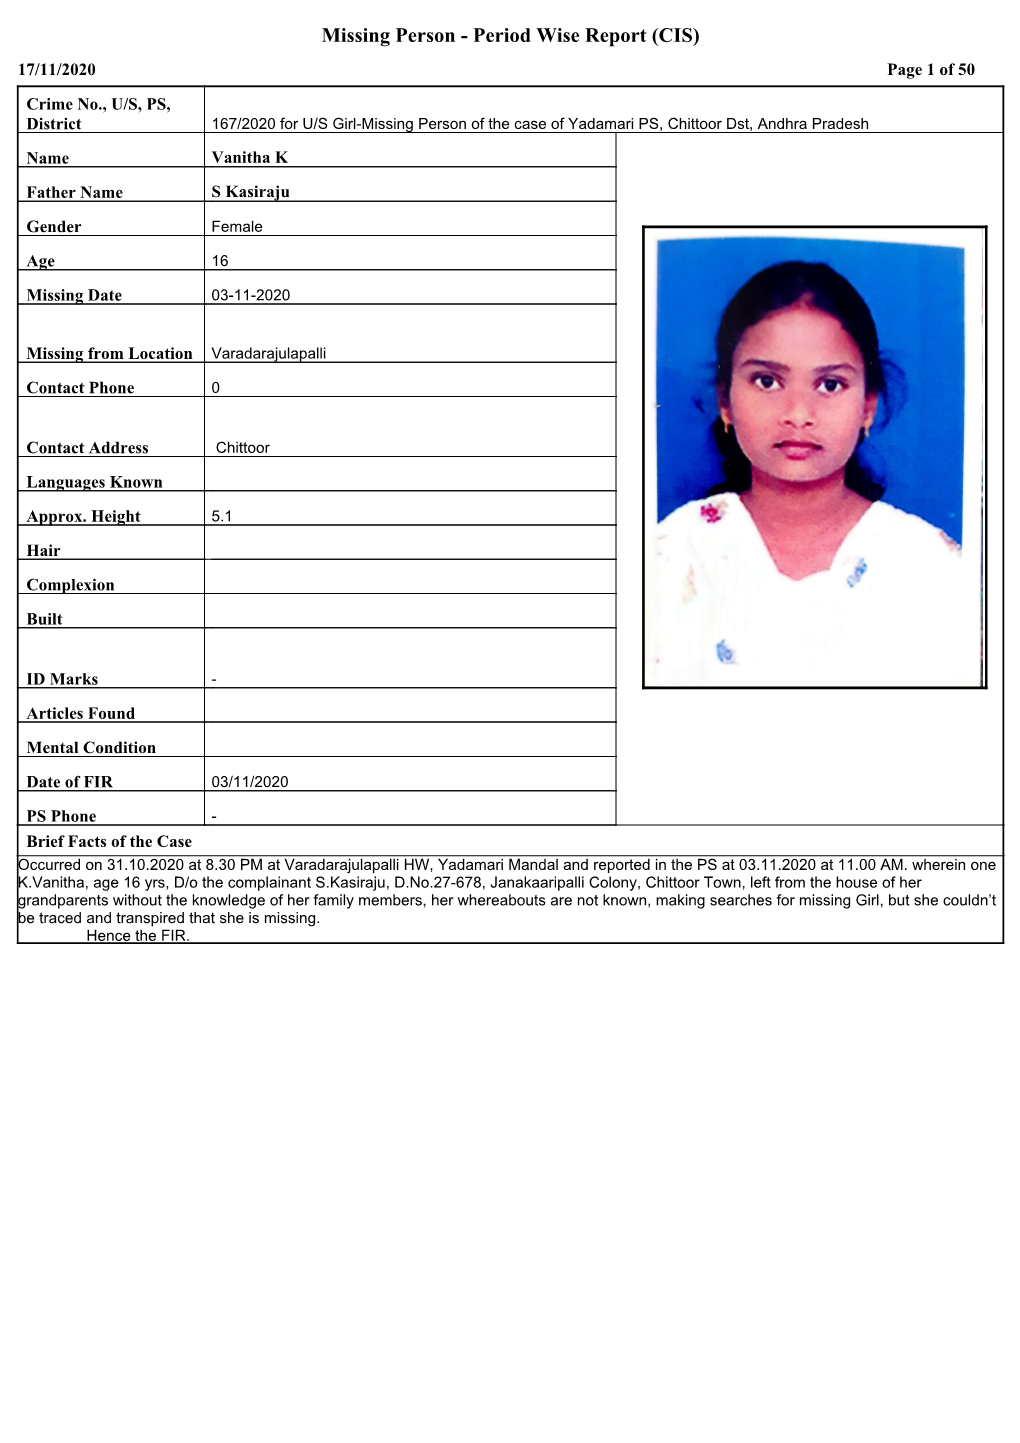 Missing Person - Period Wise Report (CIS) 17/11/2020 Page 1 of 50